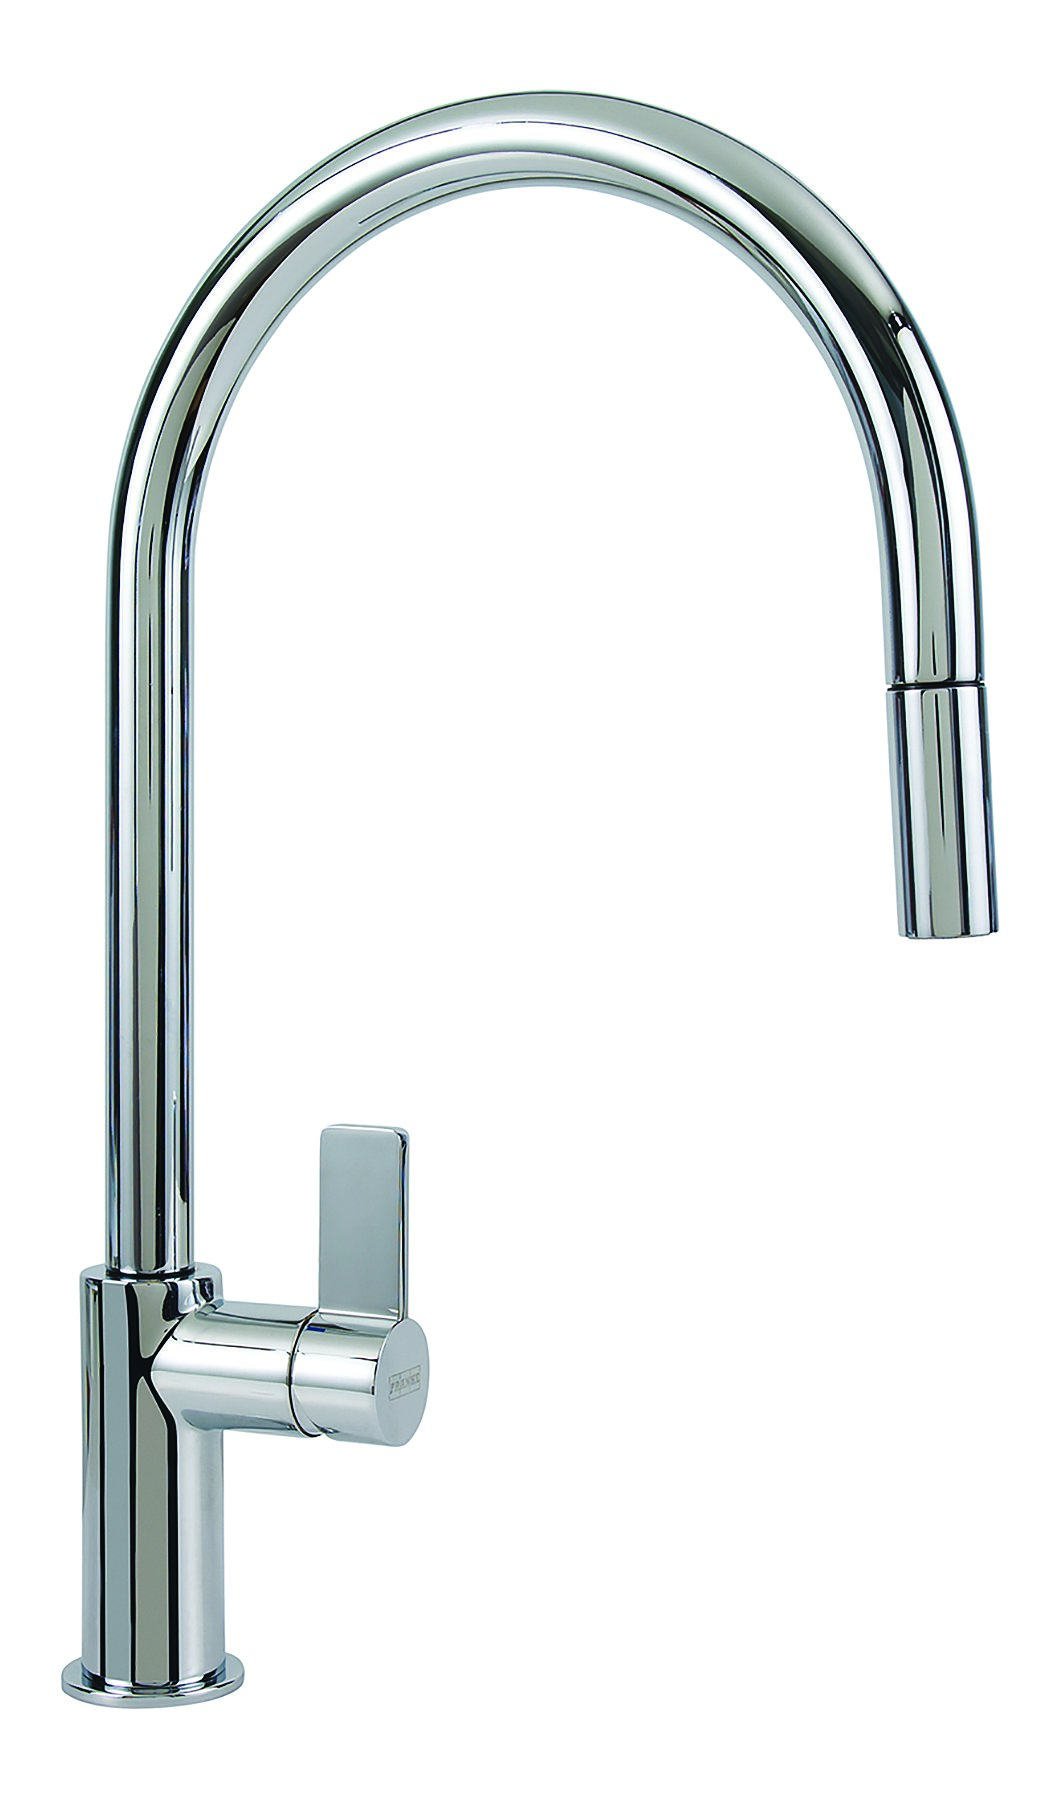 Franke_Ambient_Pull-Down_Kitchen_Faucet.jpg